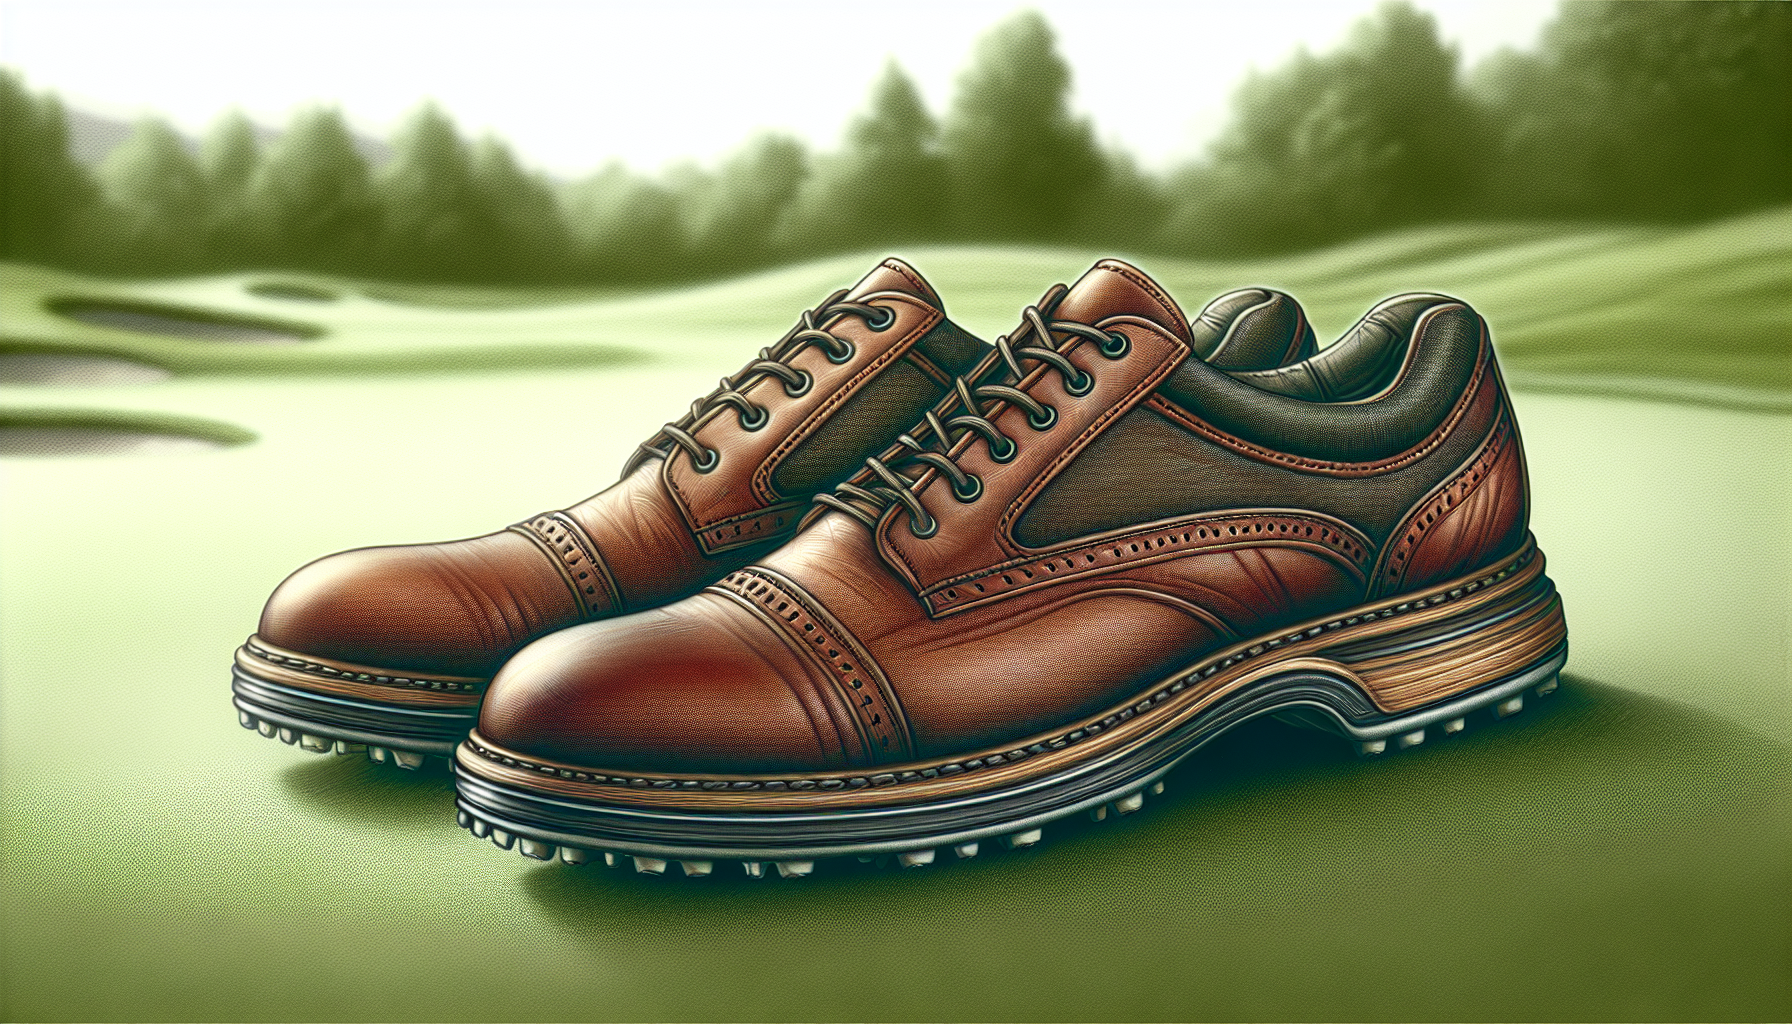 Performance leather golf shoes